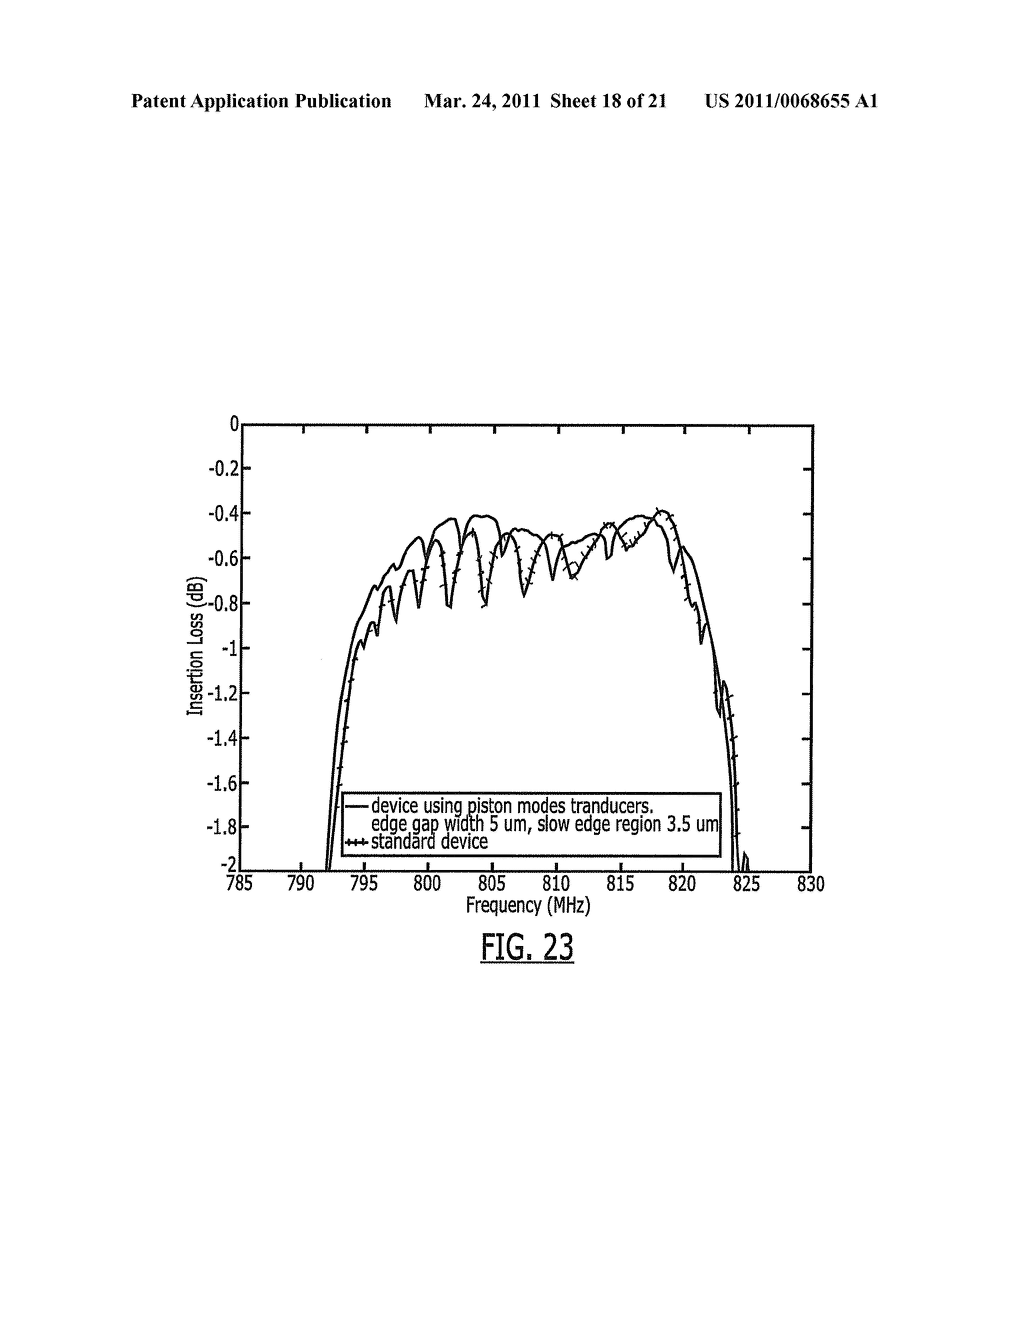 PISTON MODE ACOUSTIC WAVE DEVICE AND METHOD PROVIDING A HIGH COUPLING FACTOR - diagram, schematic, and image 19